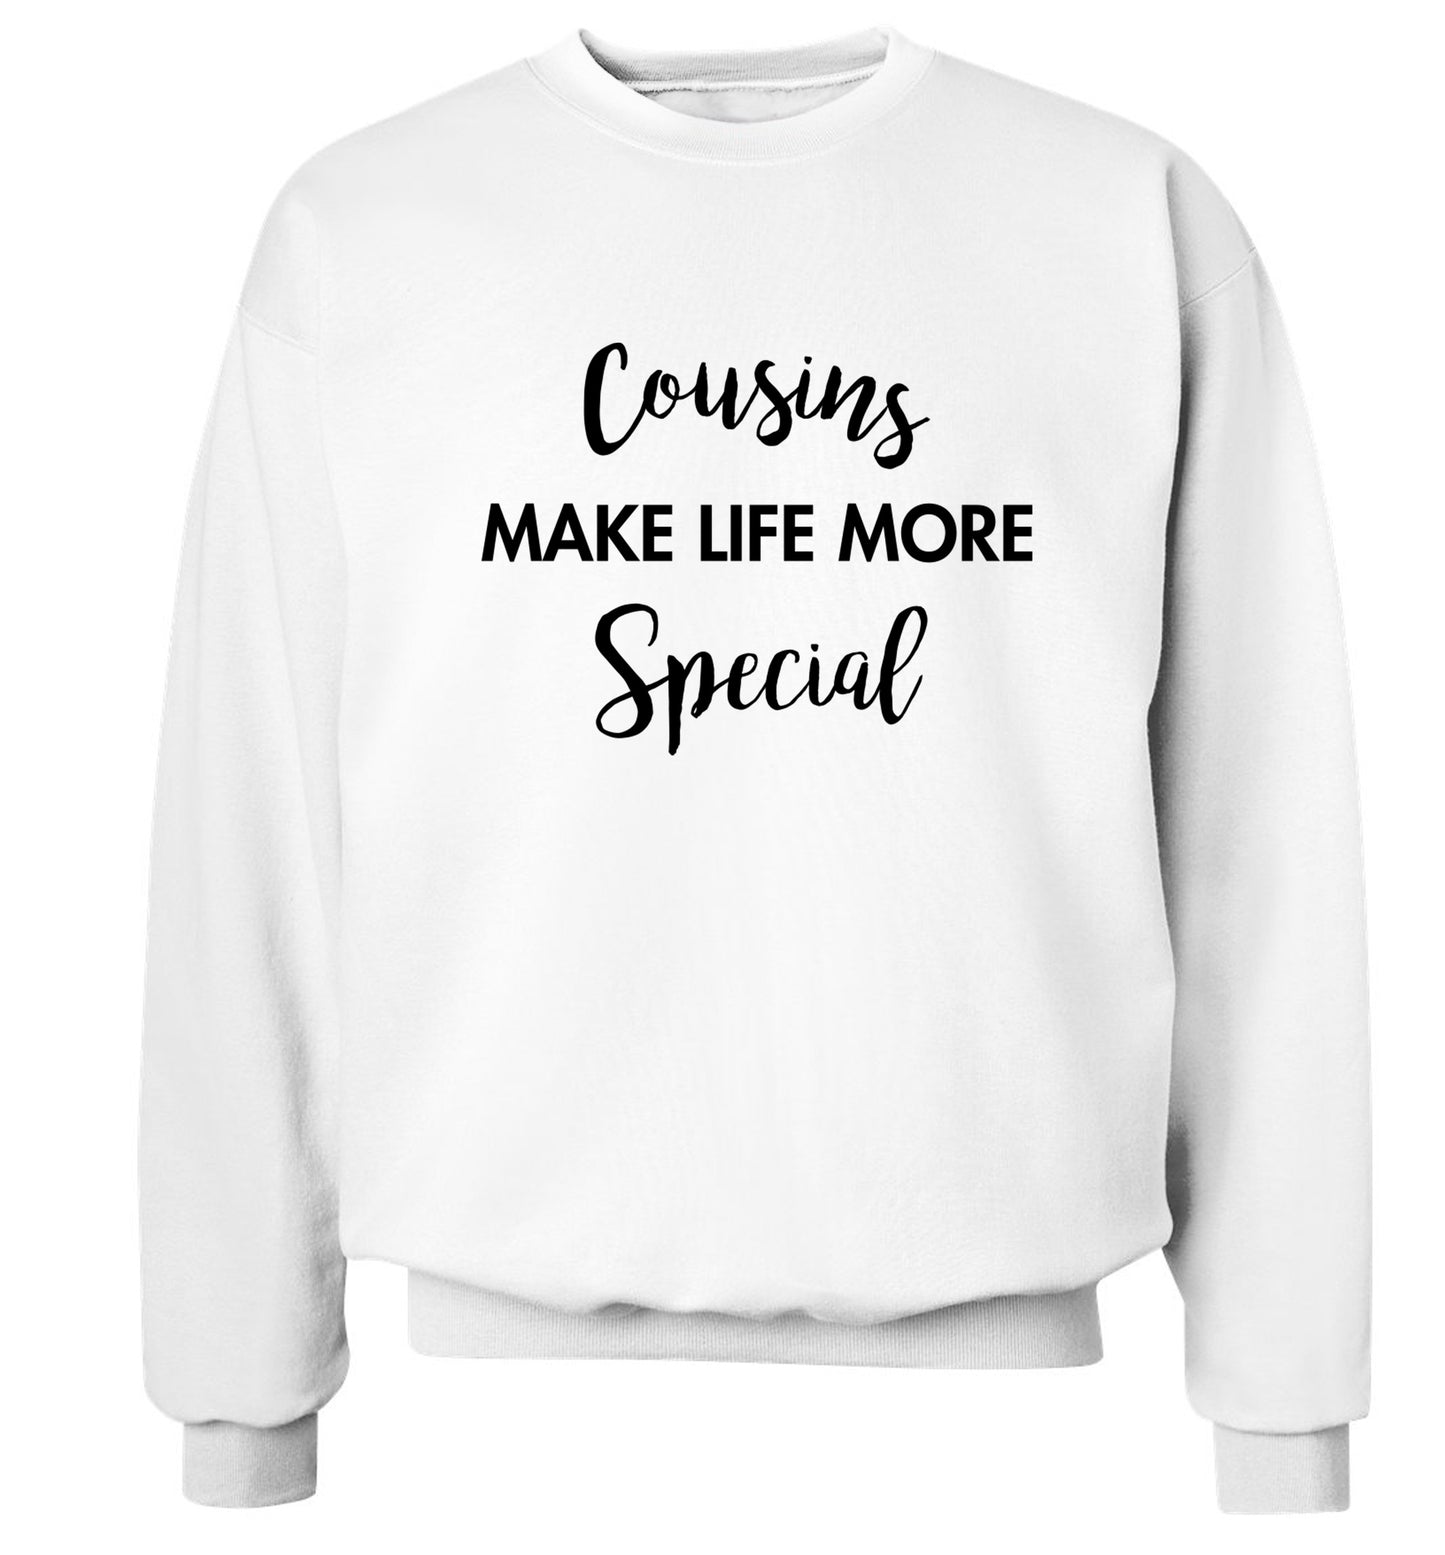 Cousins make life more special Adult's unisex white Sweater 2XL